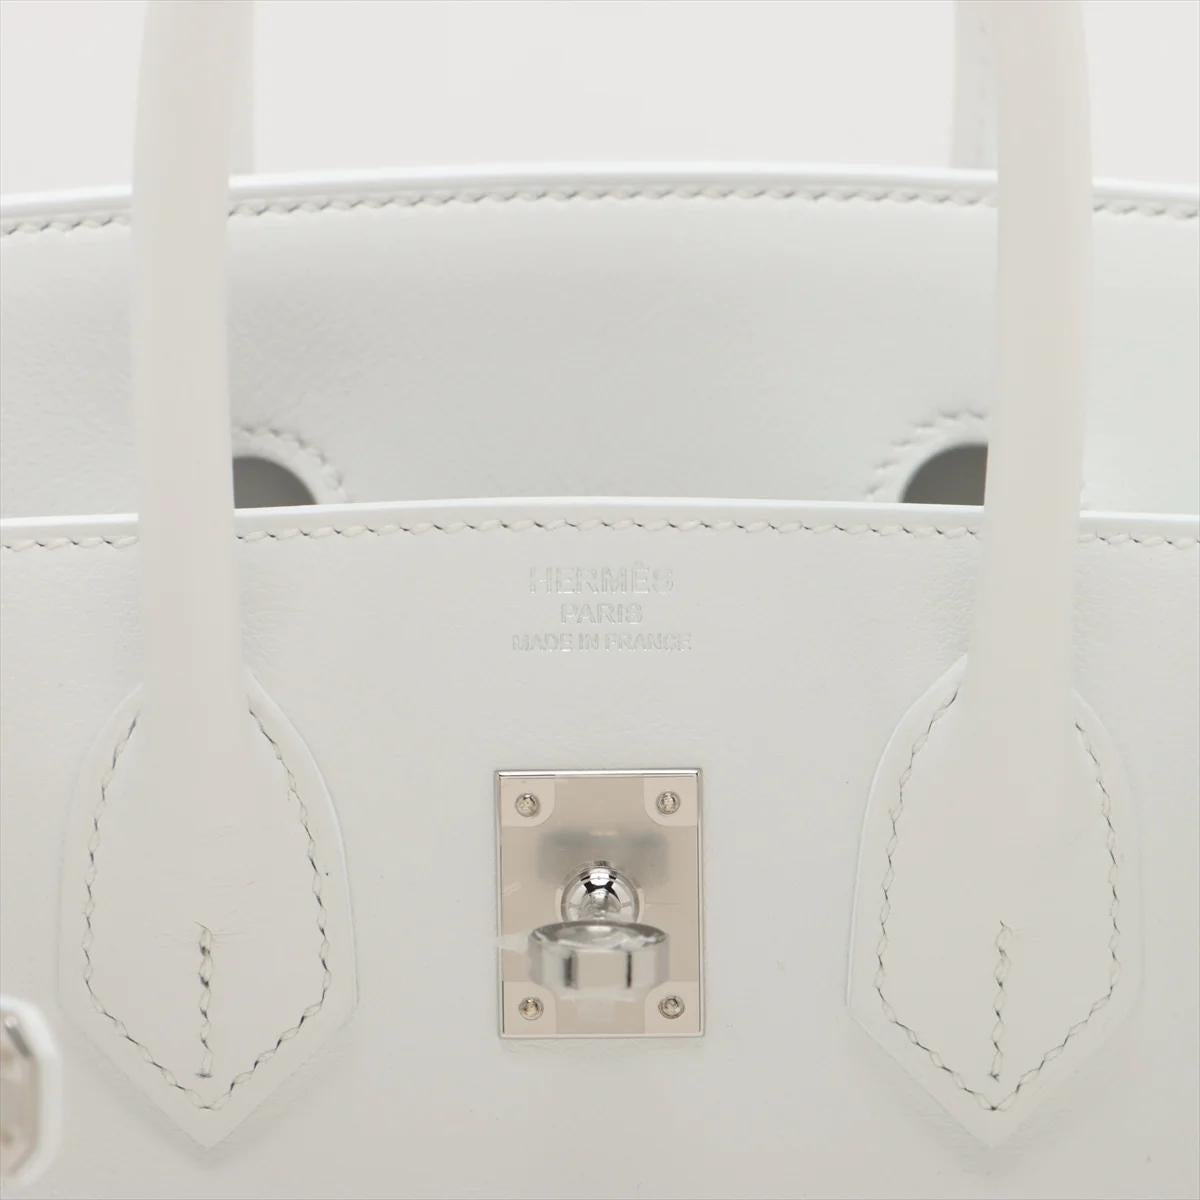 Hermes Birkin 25cm White Swift Leather Palladium Hardware In New Condition For Sale In Sydney, New South Wales